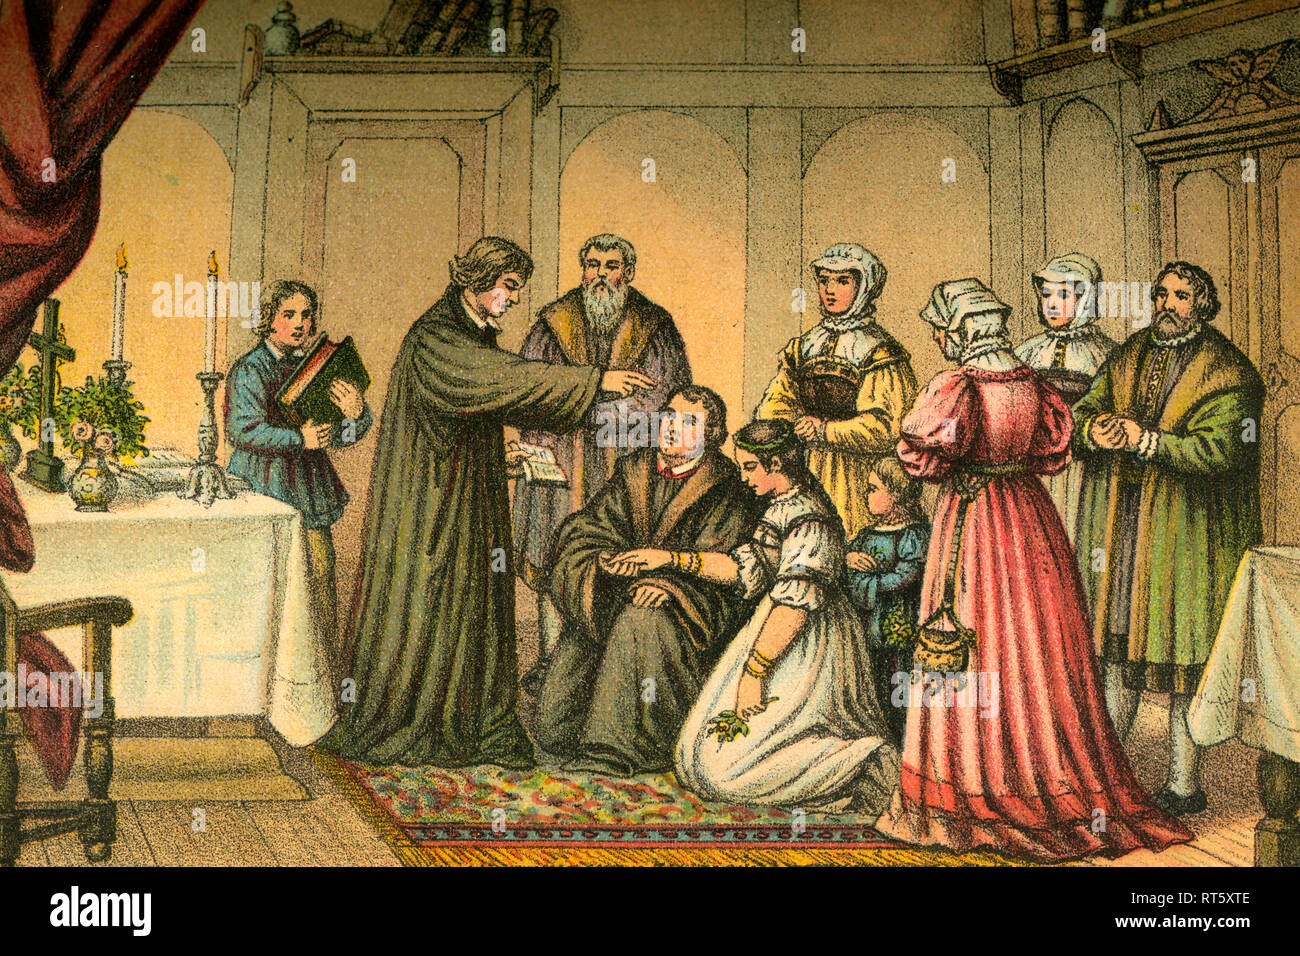 The marriage of Martin Luther with Katharina von Bora, coloured  illustration (artist unknown) from: "Doktor Martin Luthers Leben, Thaten  und Meinungen... " (Doctor Martin Luthers life, deeds and opinions...),  told by Martin